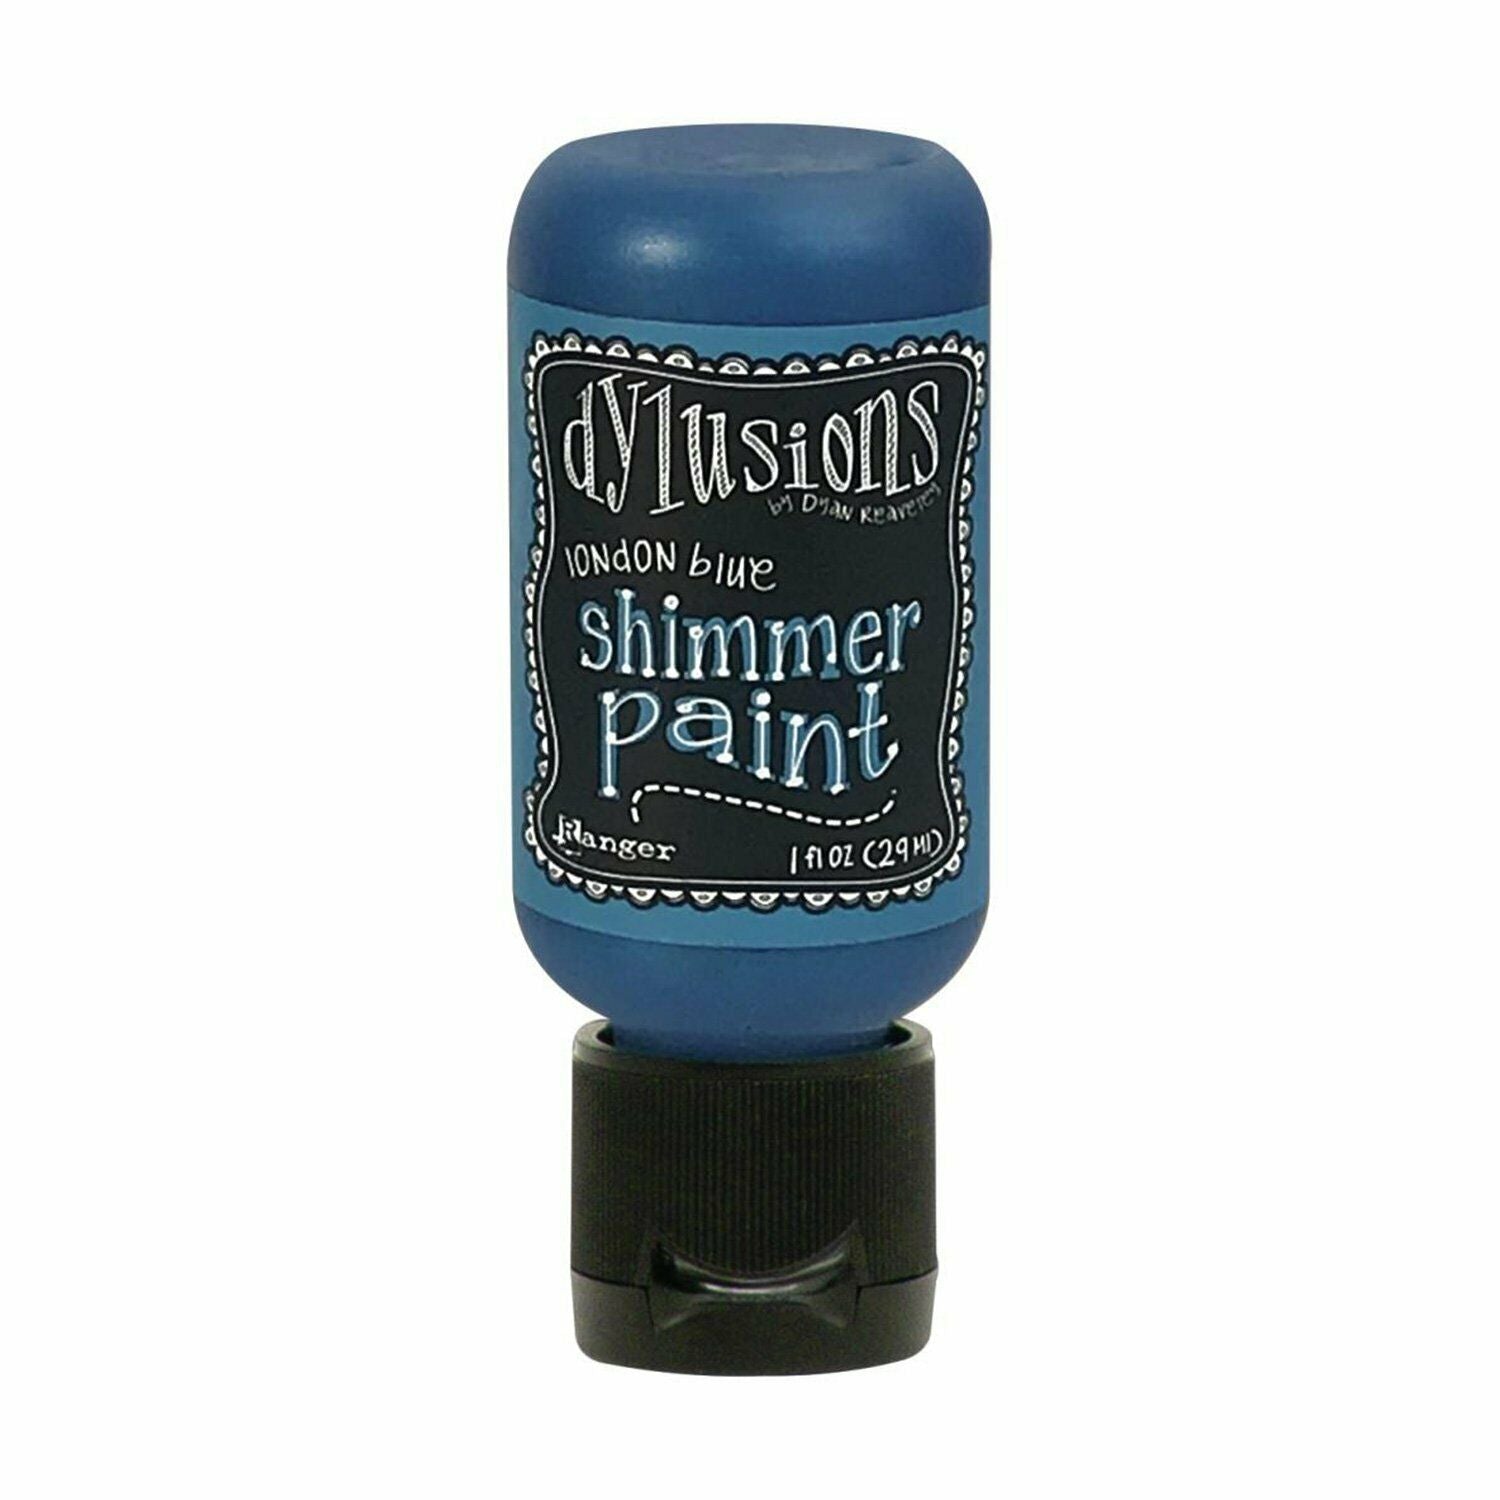 dylusions   Shimmer Paint  London Blue